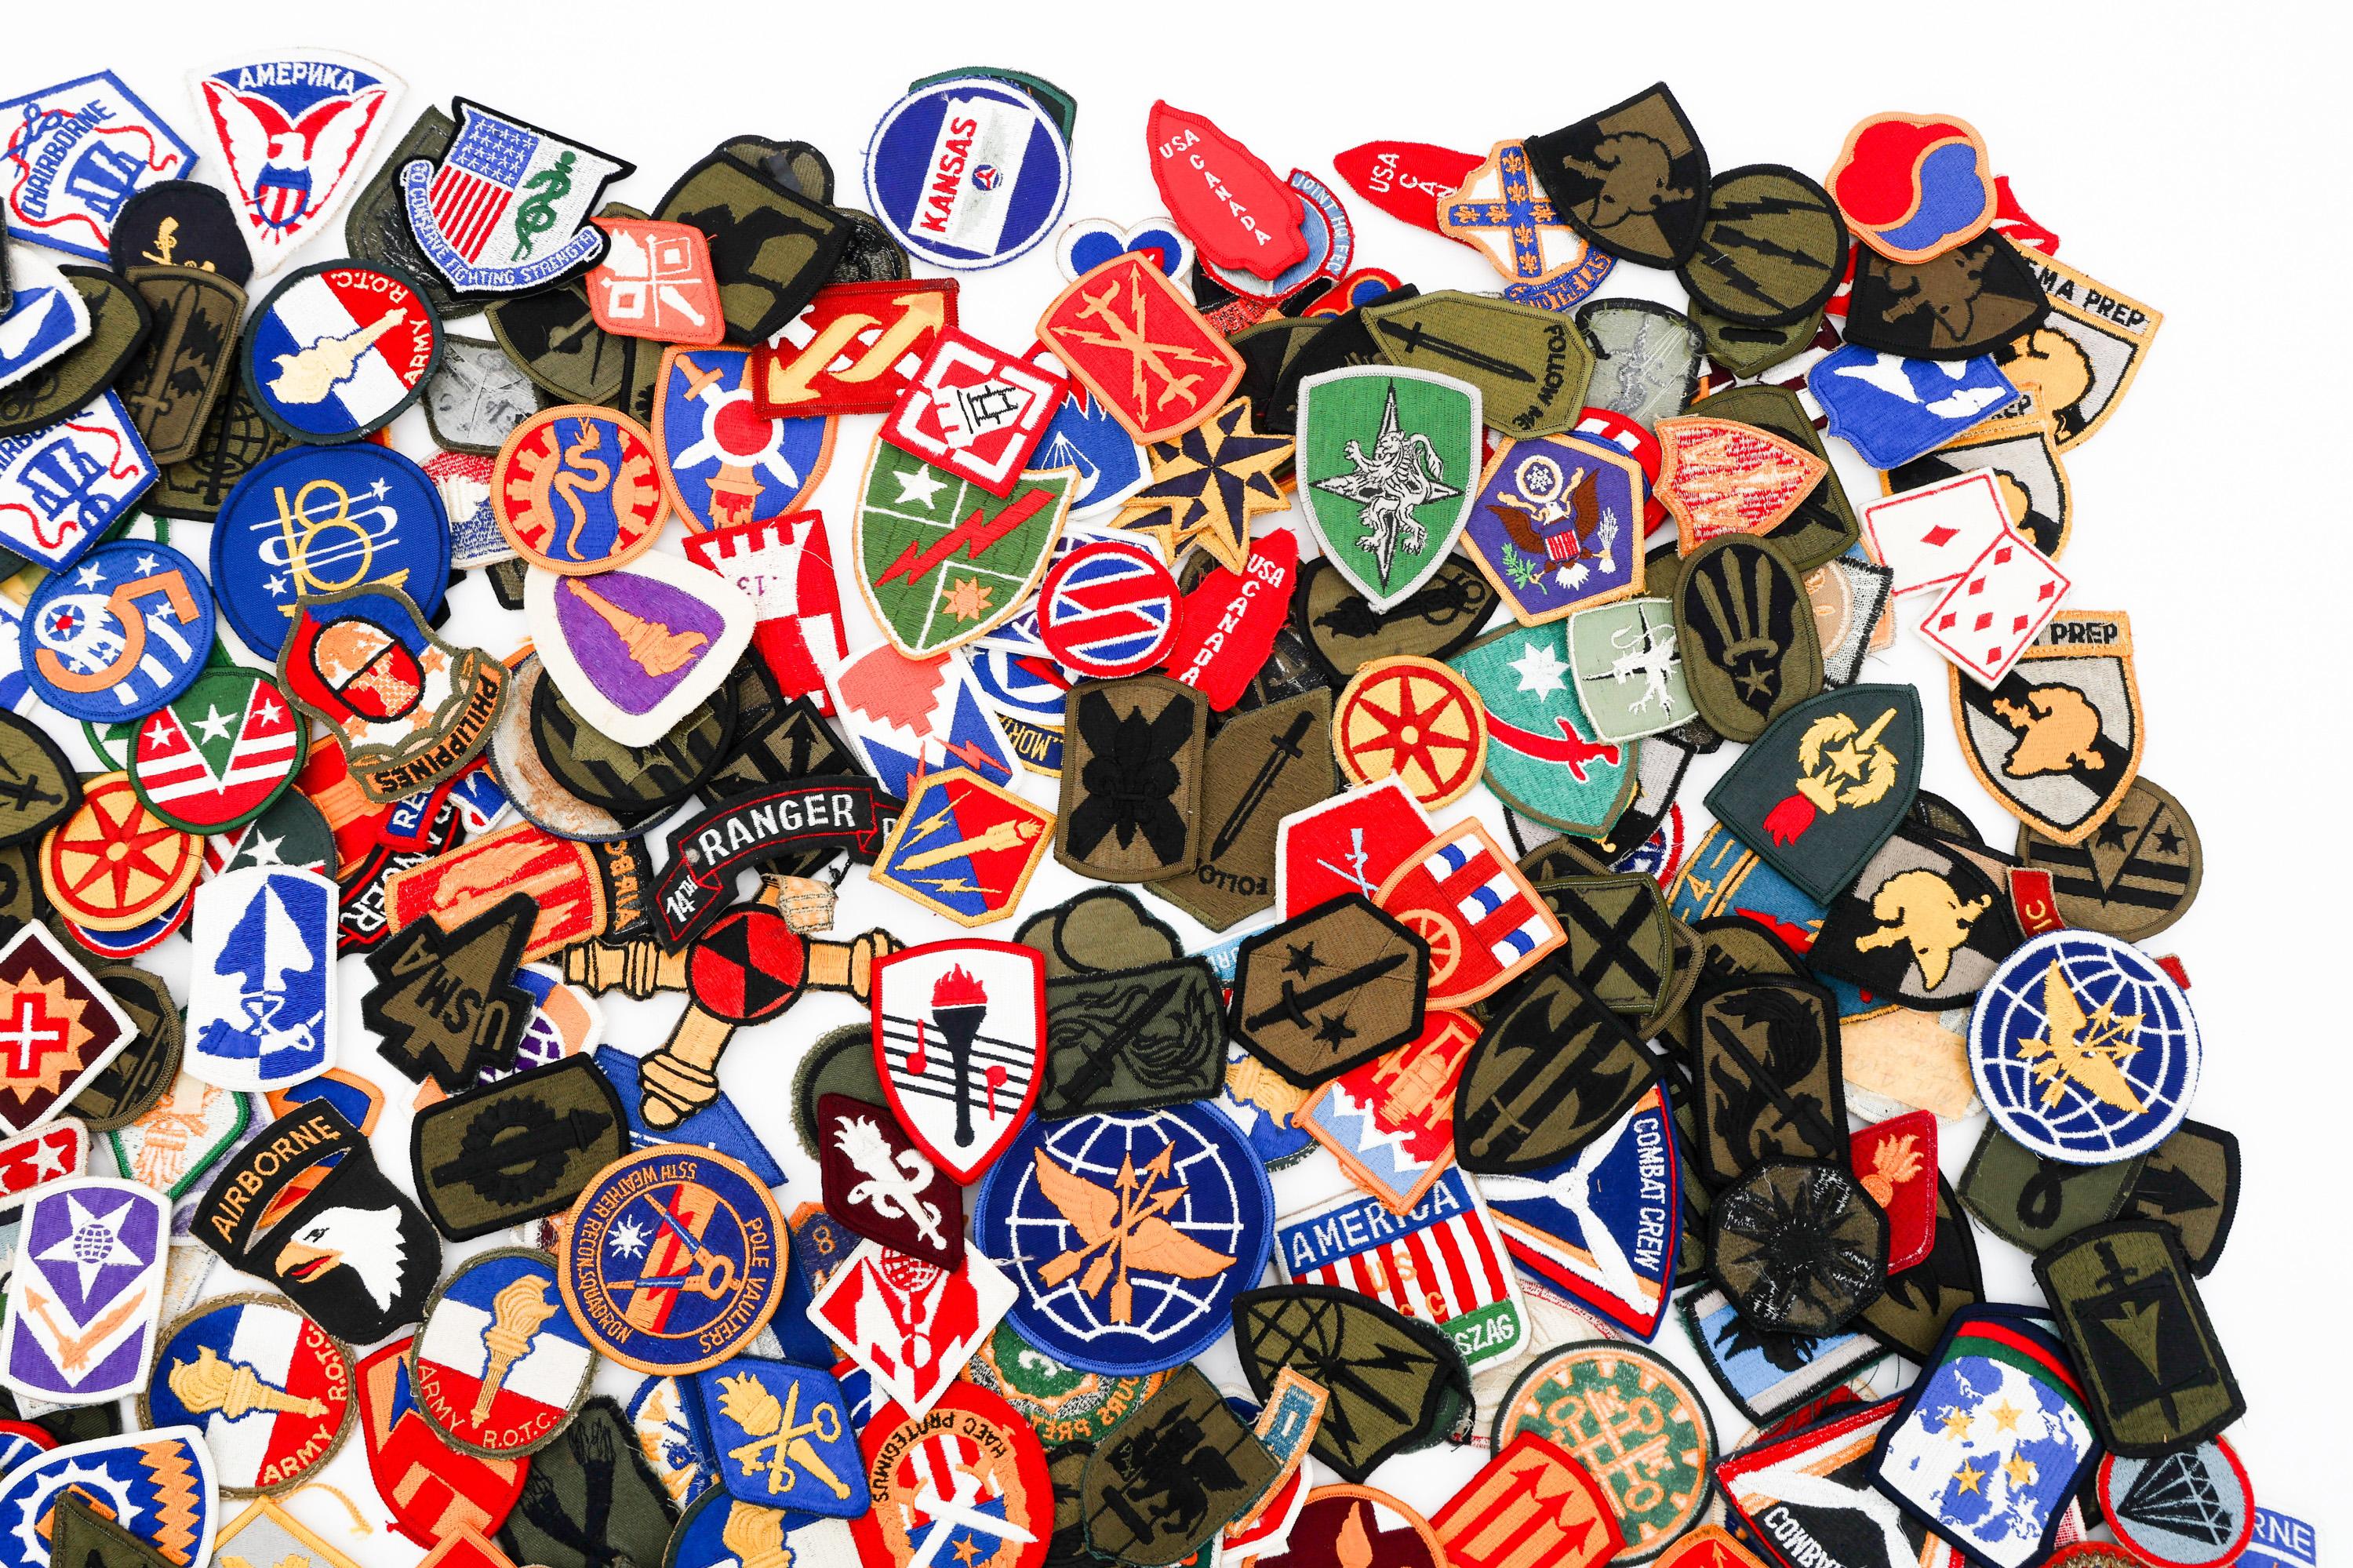 COLD WAR - CURRENT US ARMED FORCES PATCHES